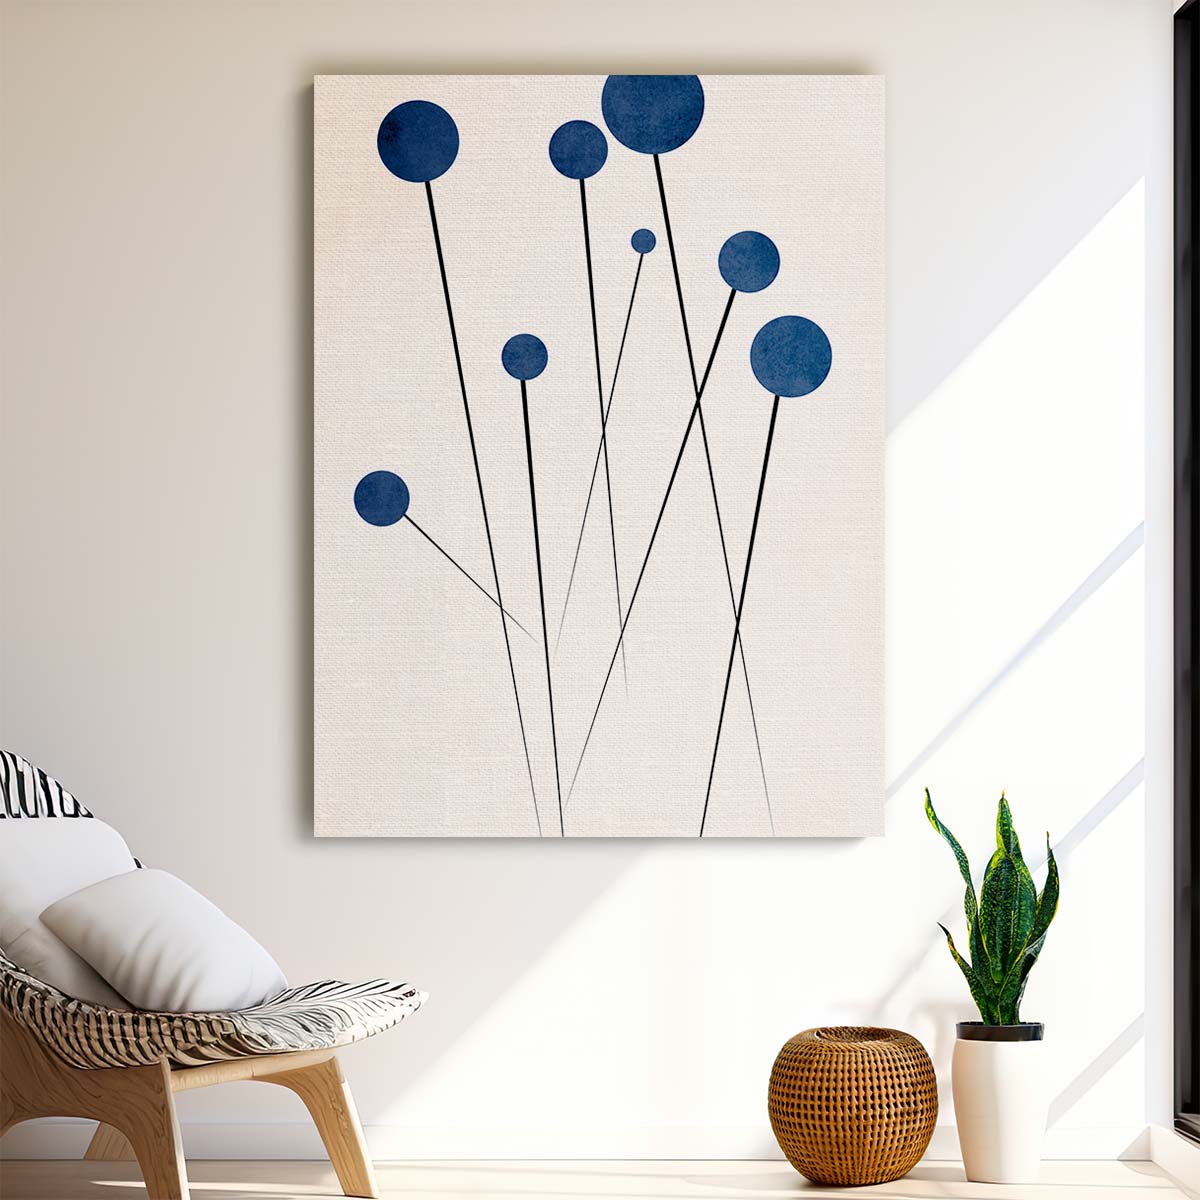 Kubistika's Bright Blueberry Illustration Art on White Background by Luxuriance Designs, made in USA